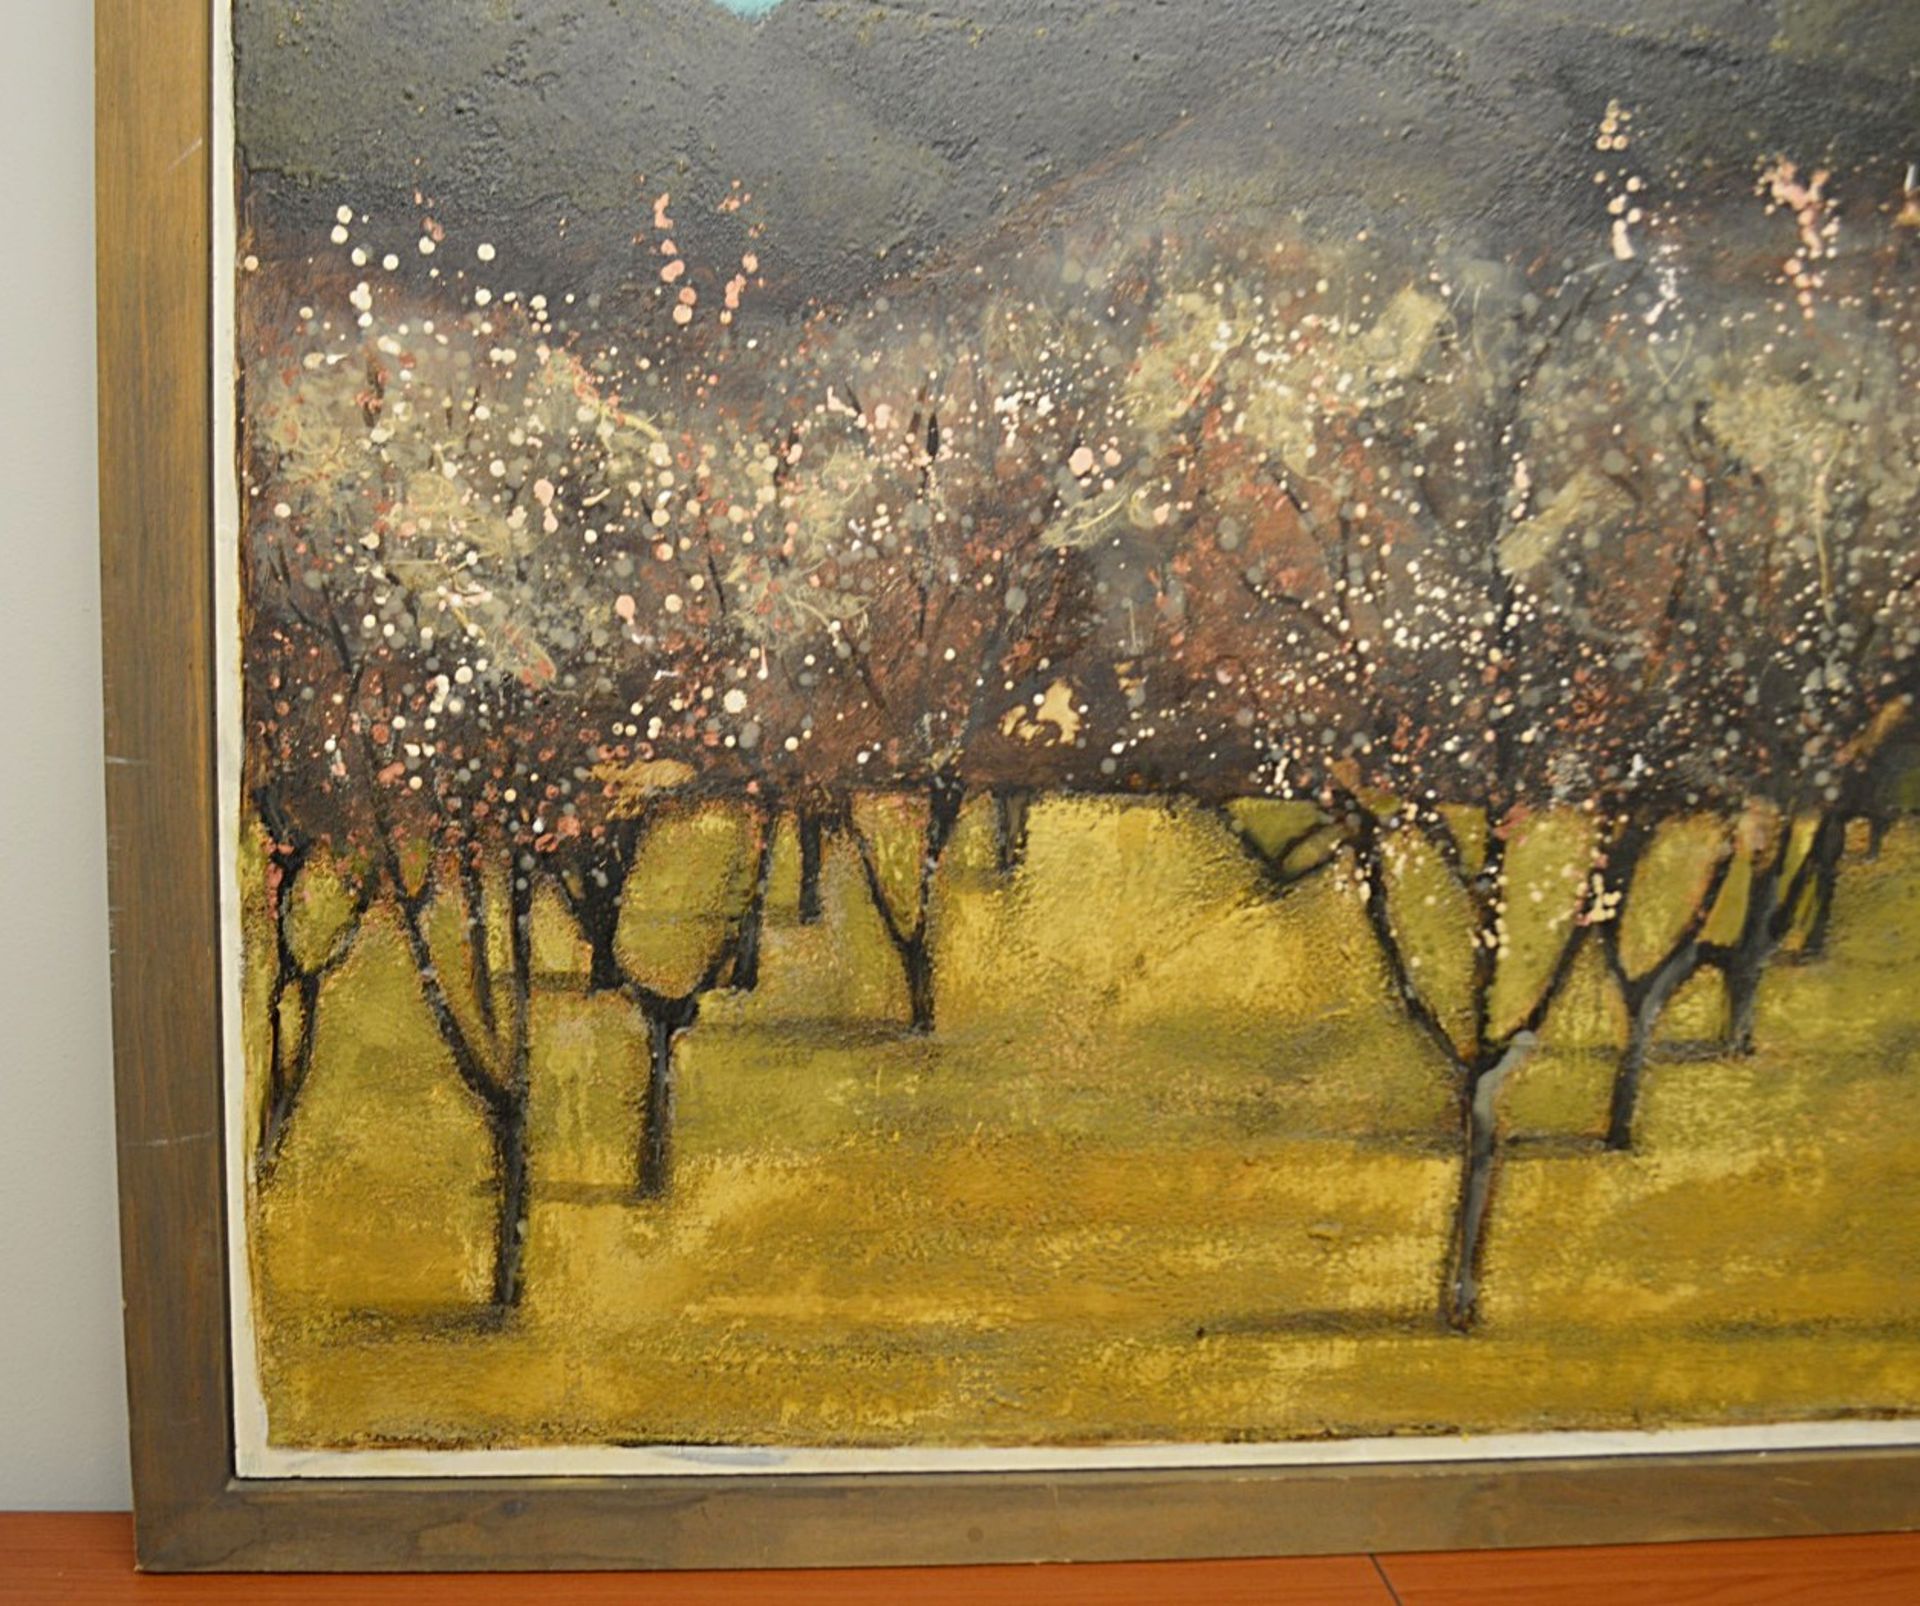 1 x Original Signed Framed Painting Of A Spanish Orchard By Lydia Bauman (1997) - Dimensions: 122 - Image 8 of 8